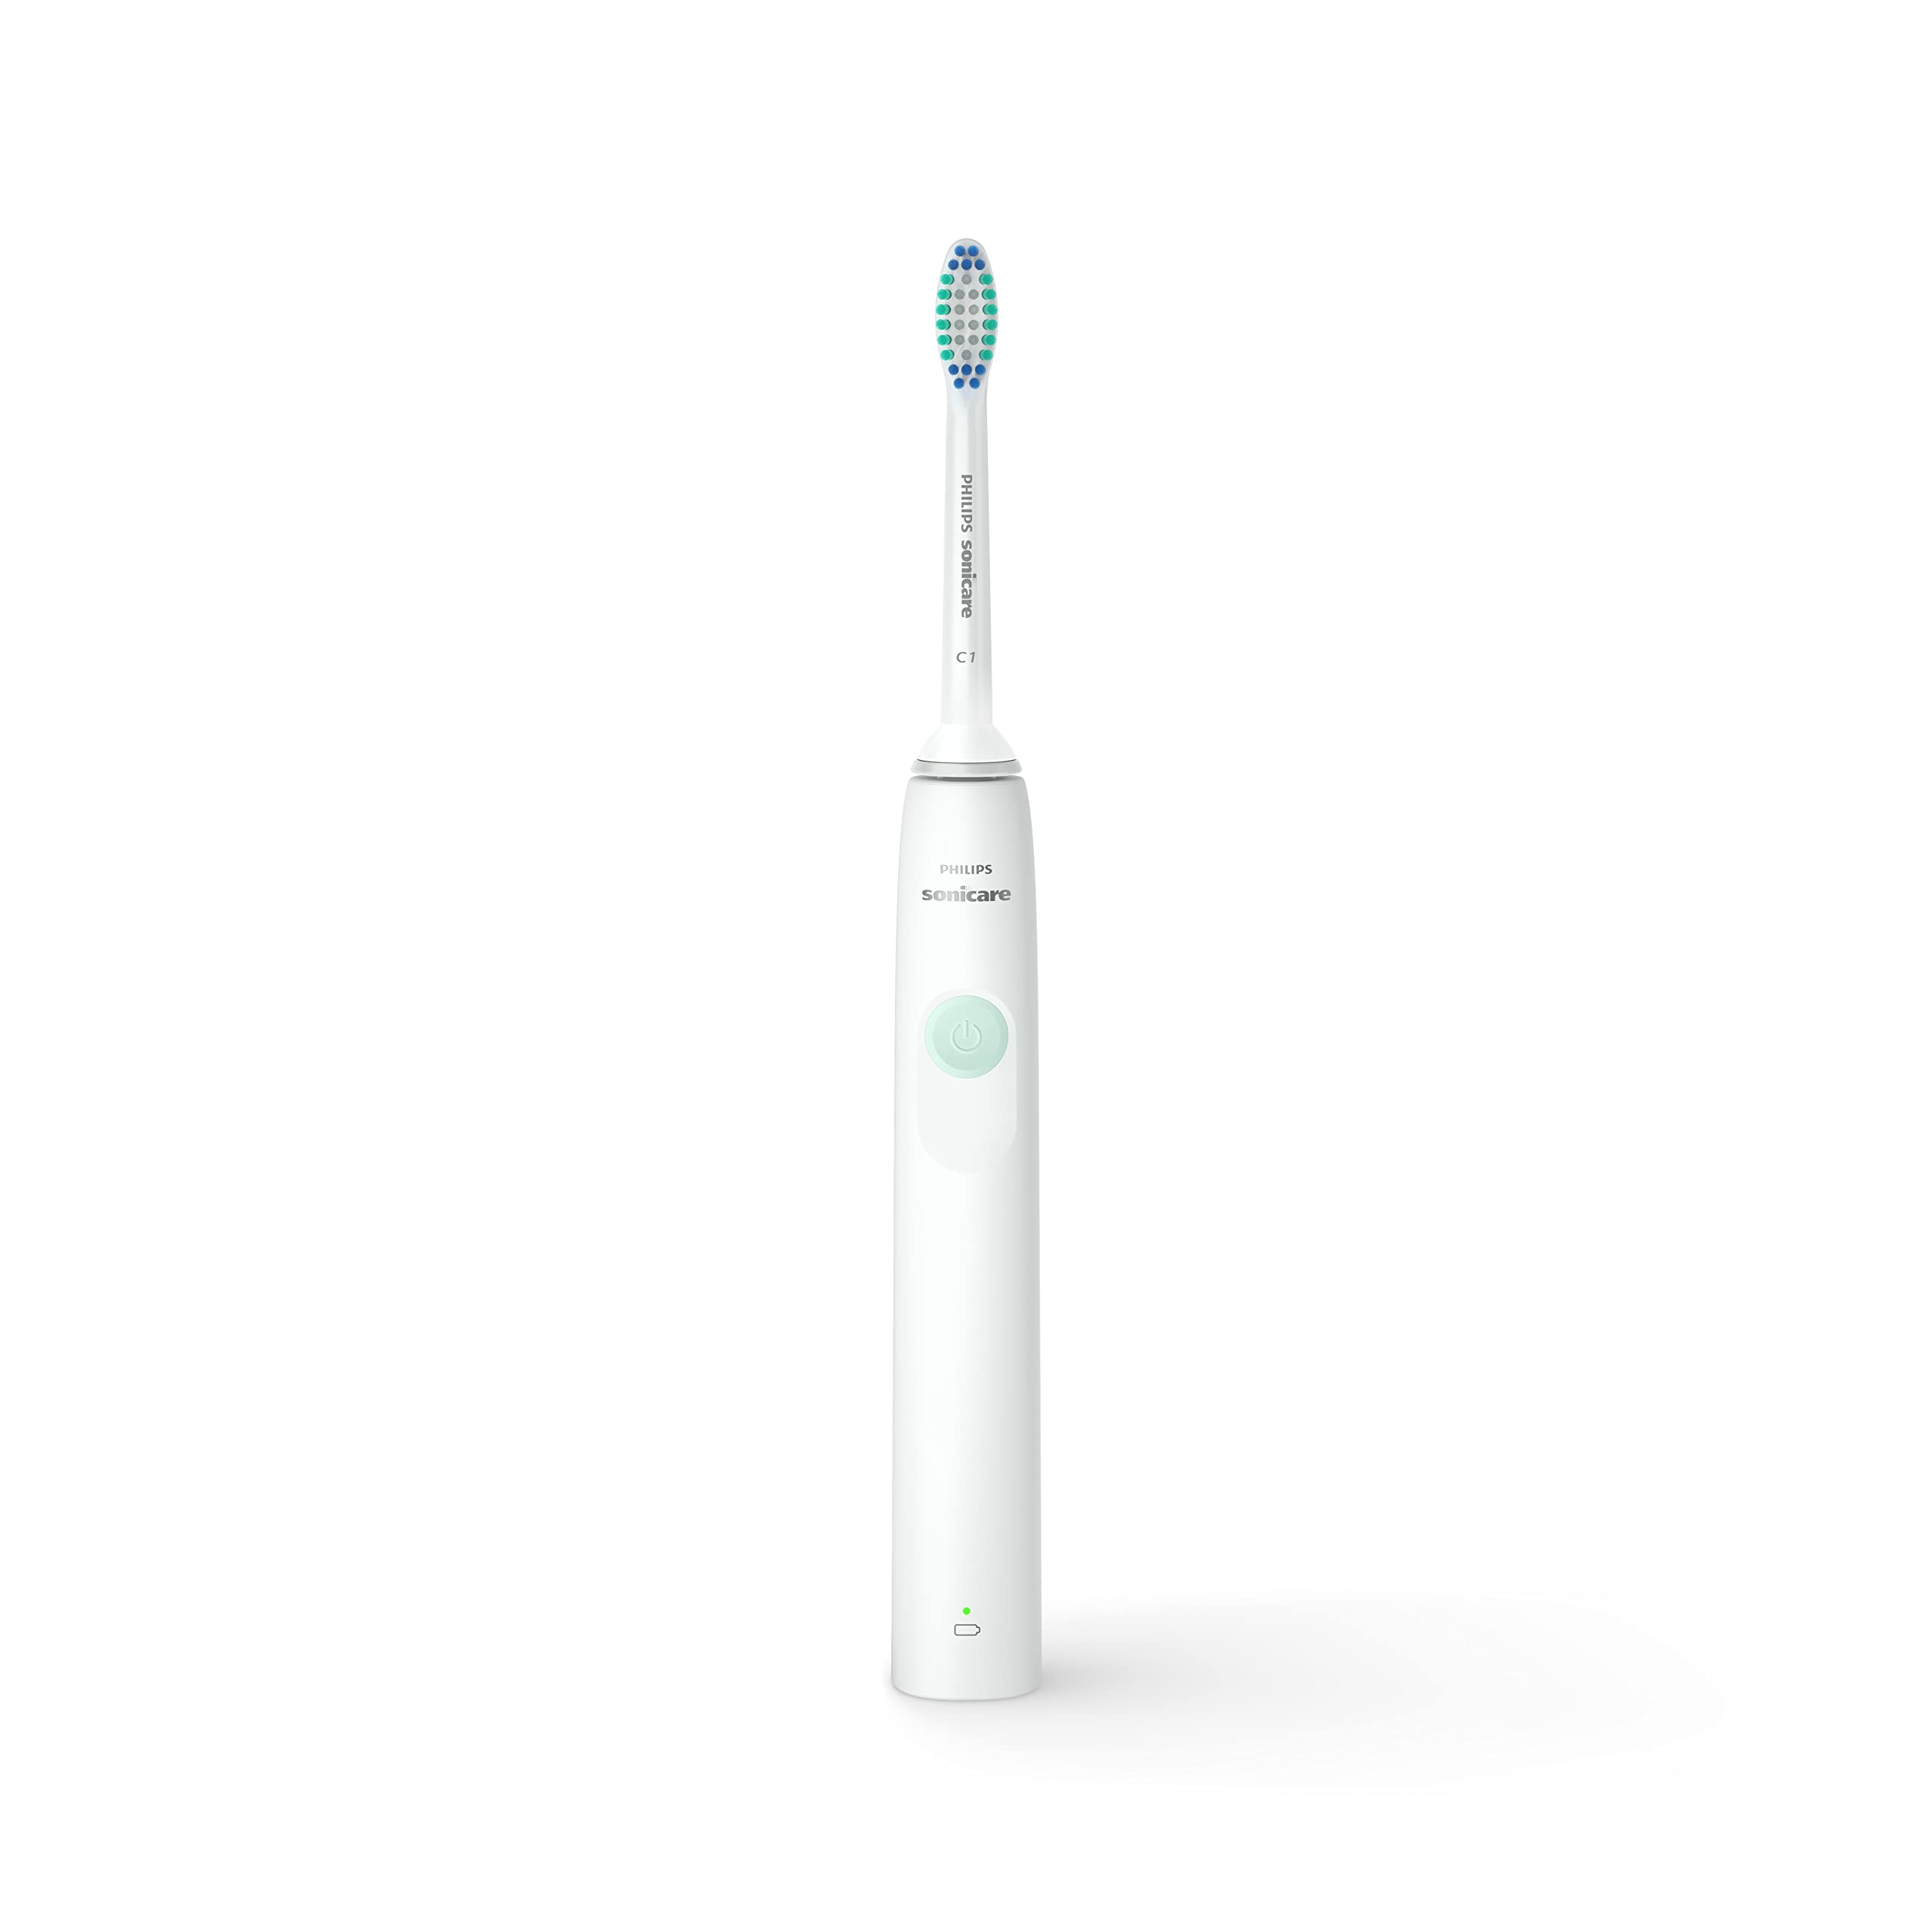 PHILIPS Sonicare 2100 Power Toothbrush, Rechargeable Electric Toothbrush, White Mint, HX3661/04